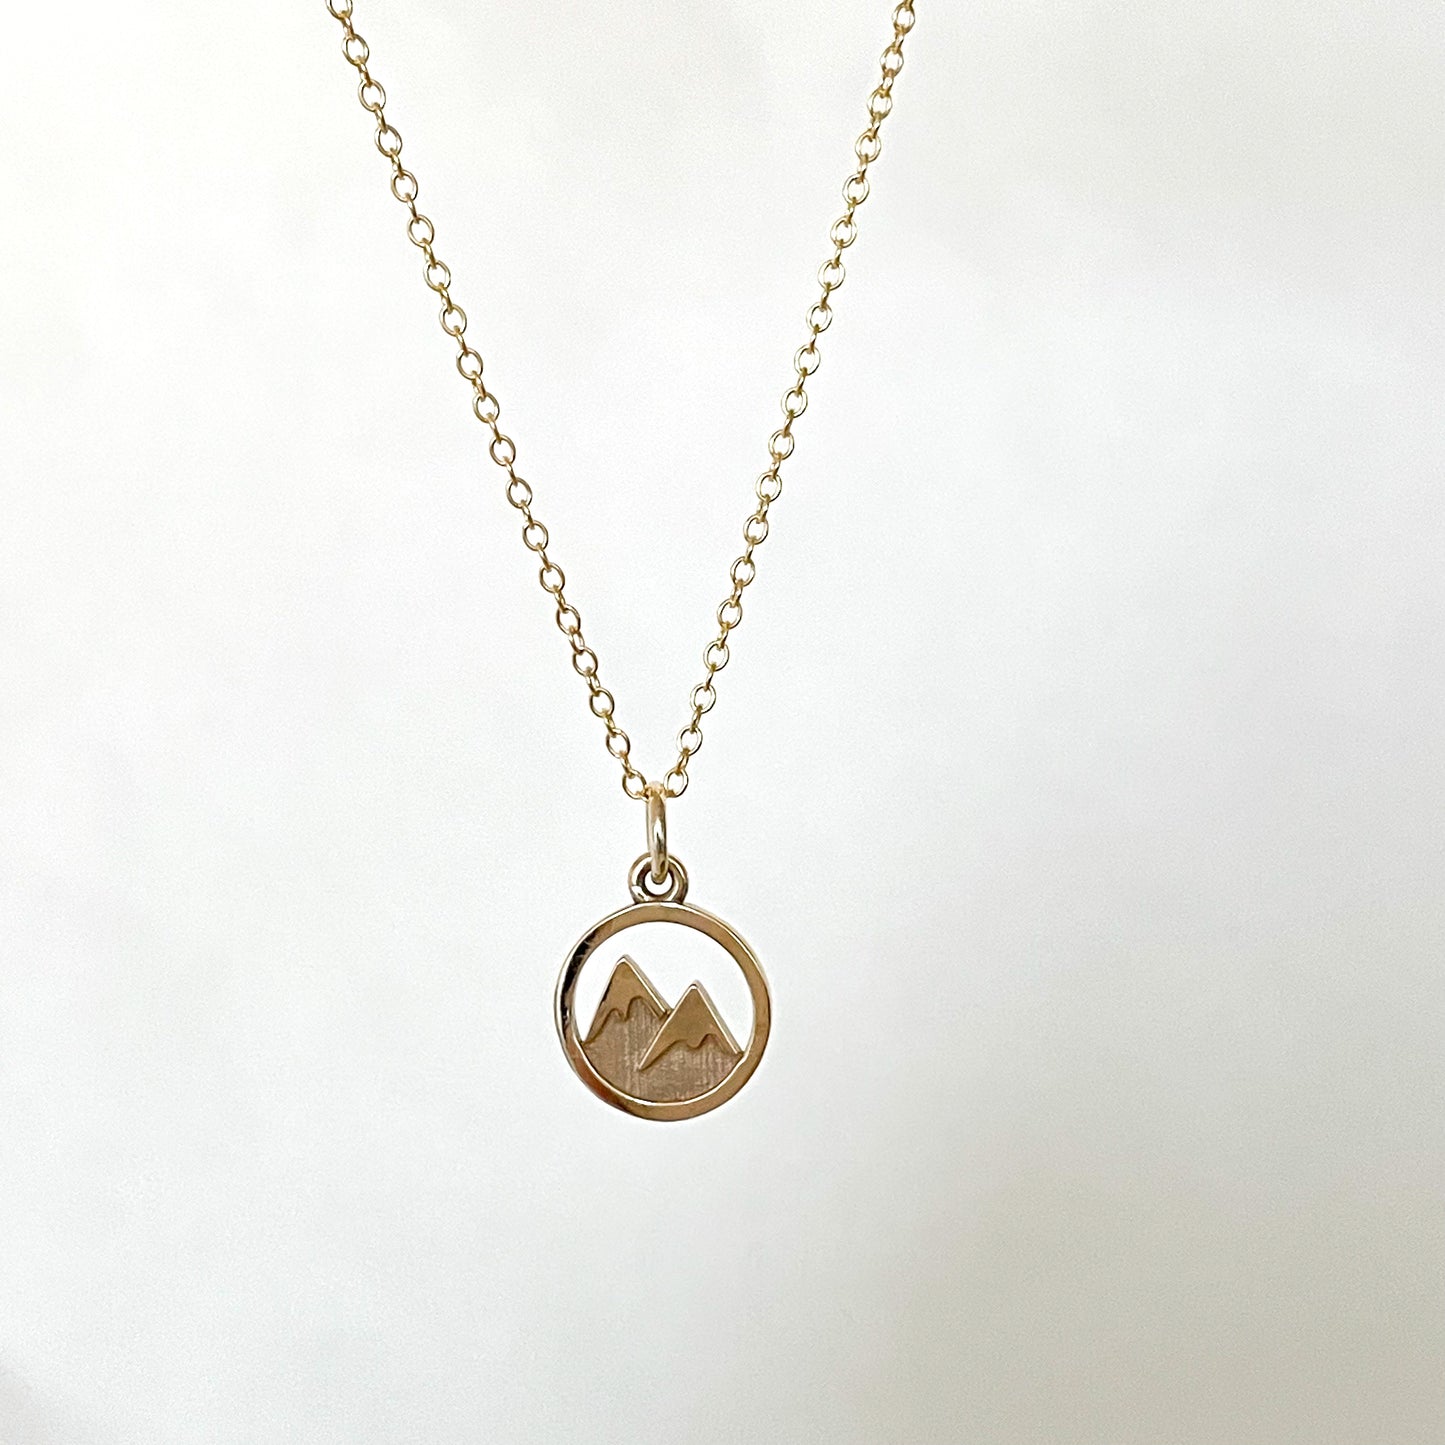 Gold Twin Peaks Necklace